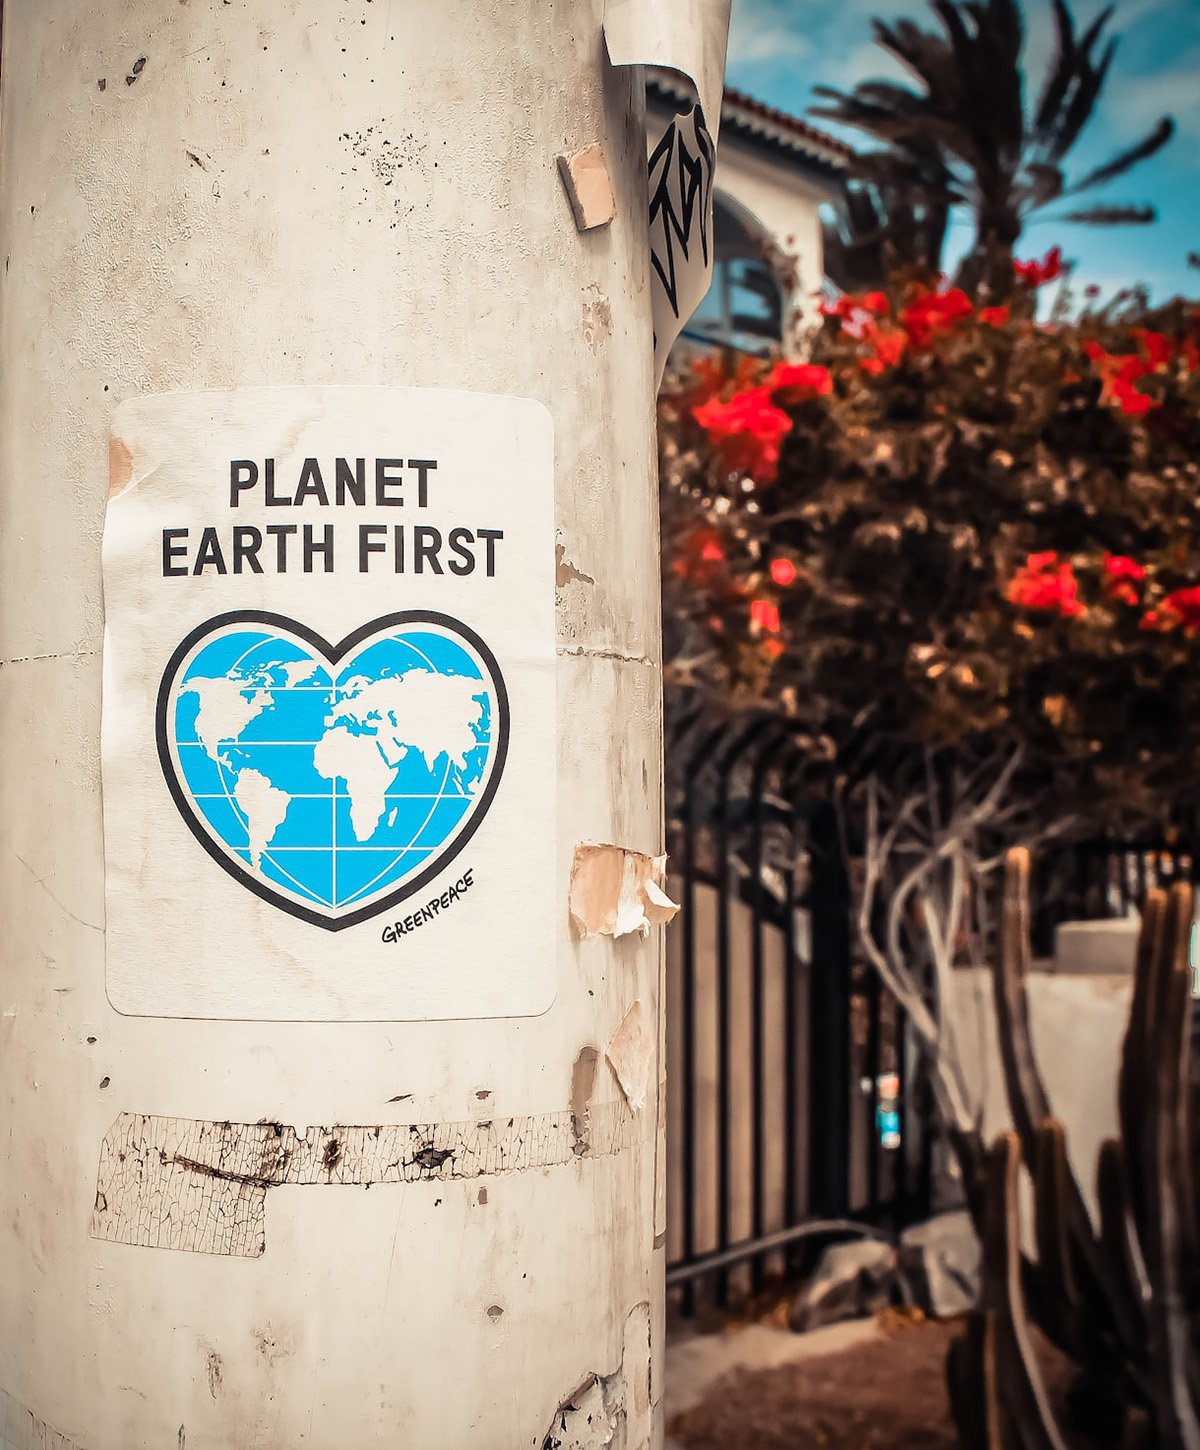 Planet Earth First poster on pole